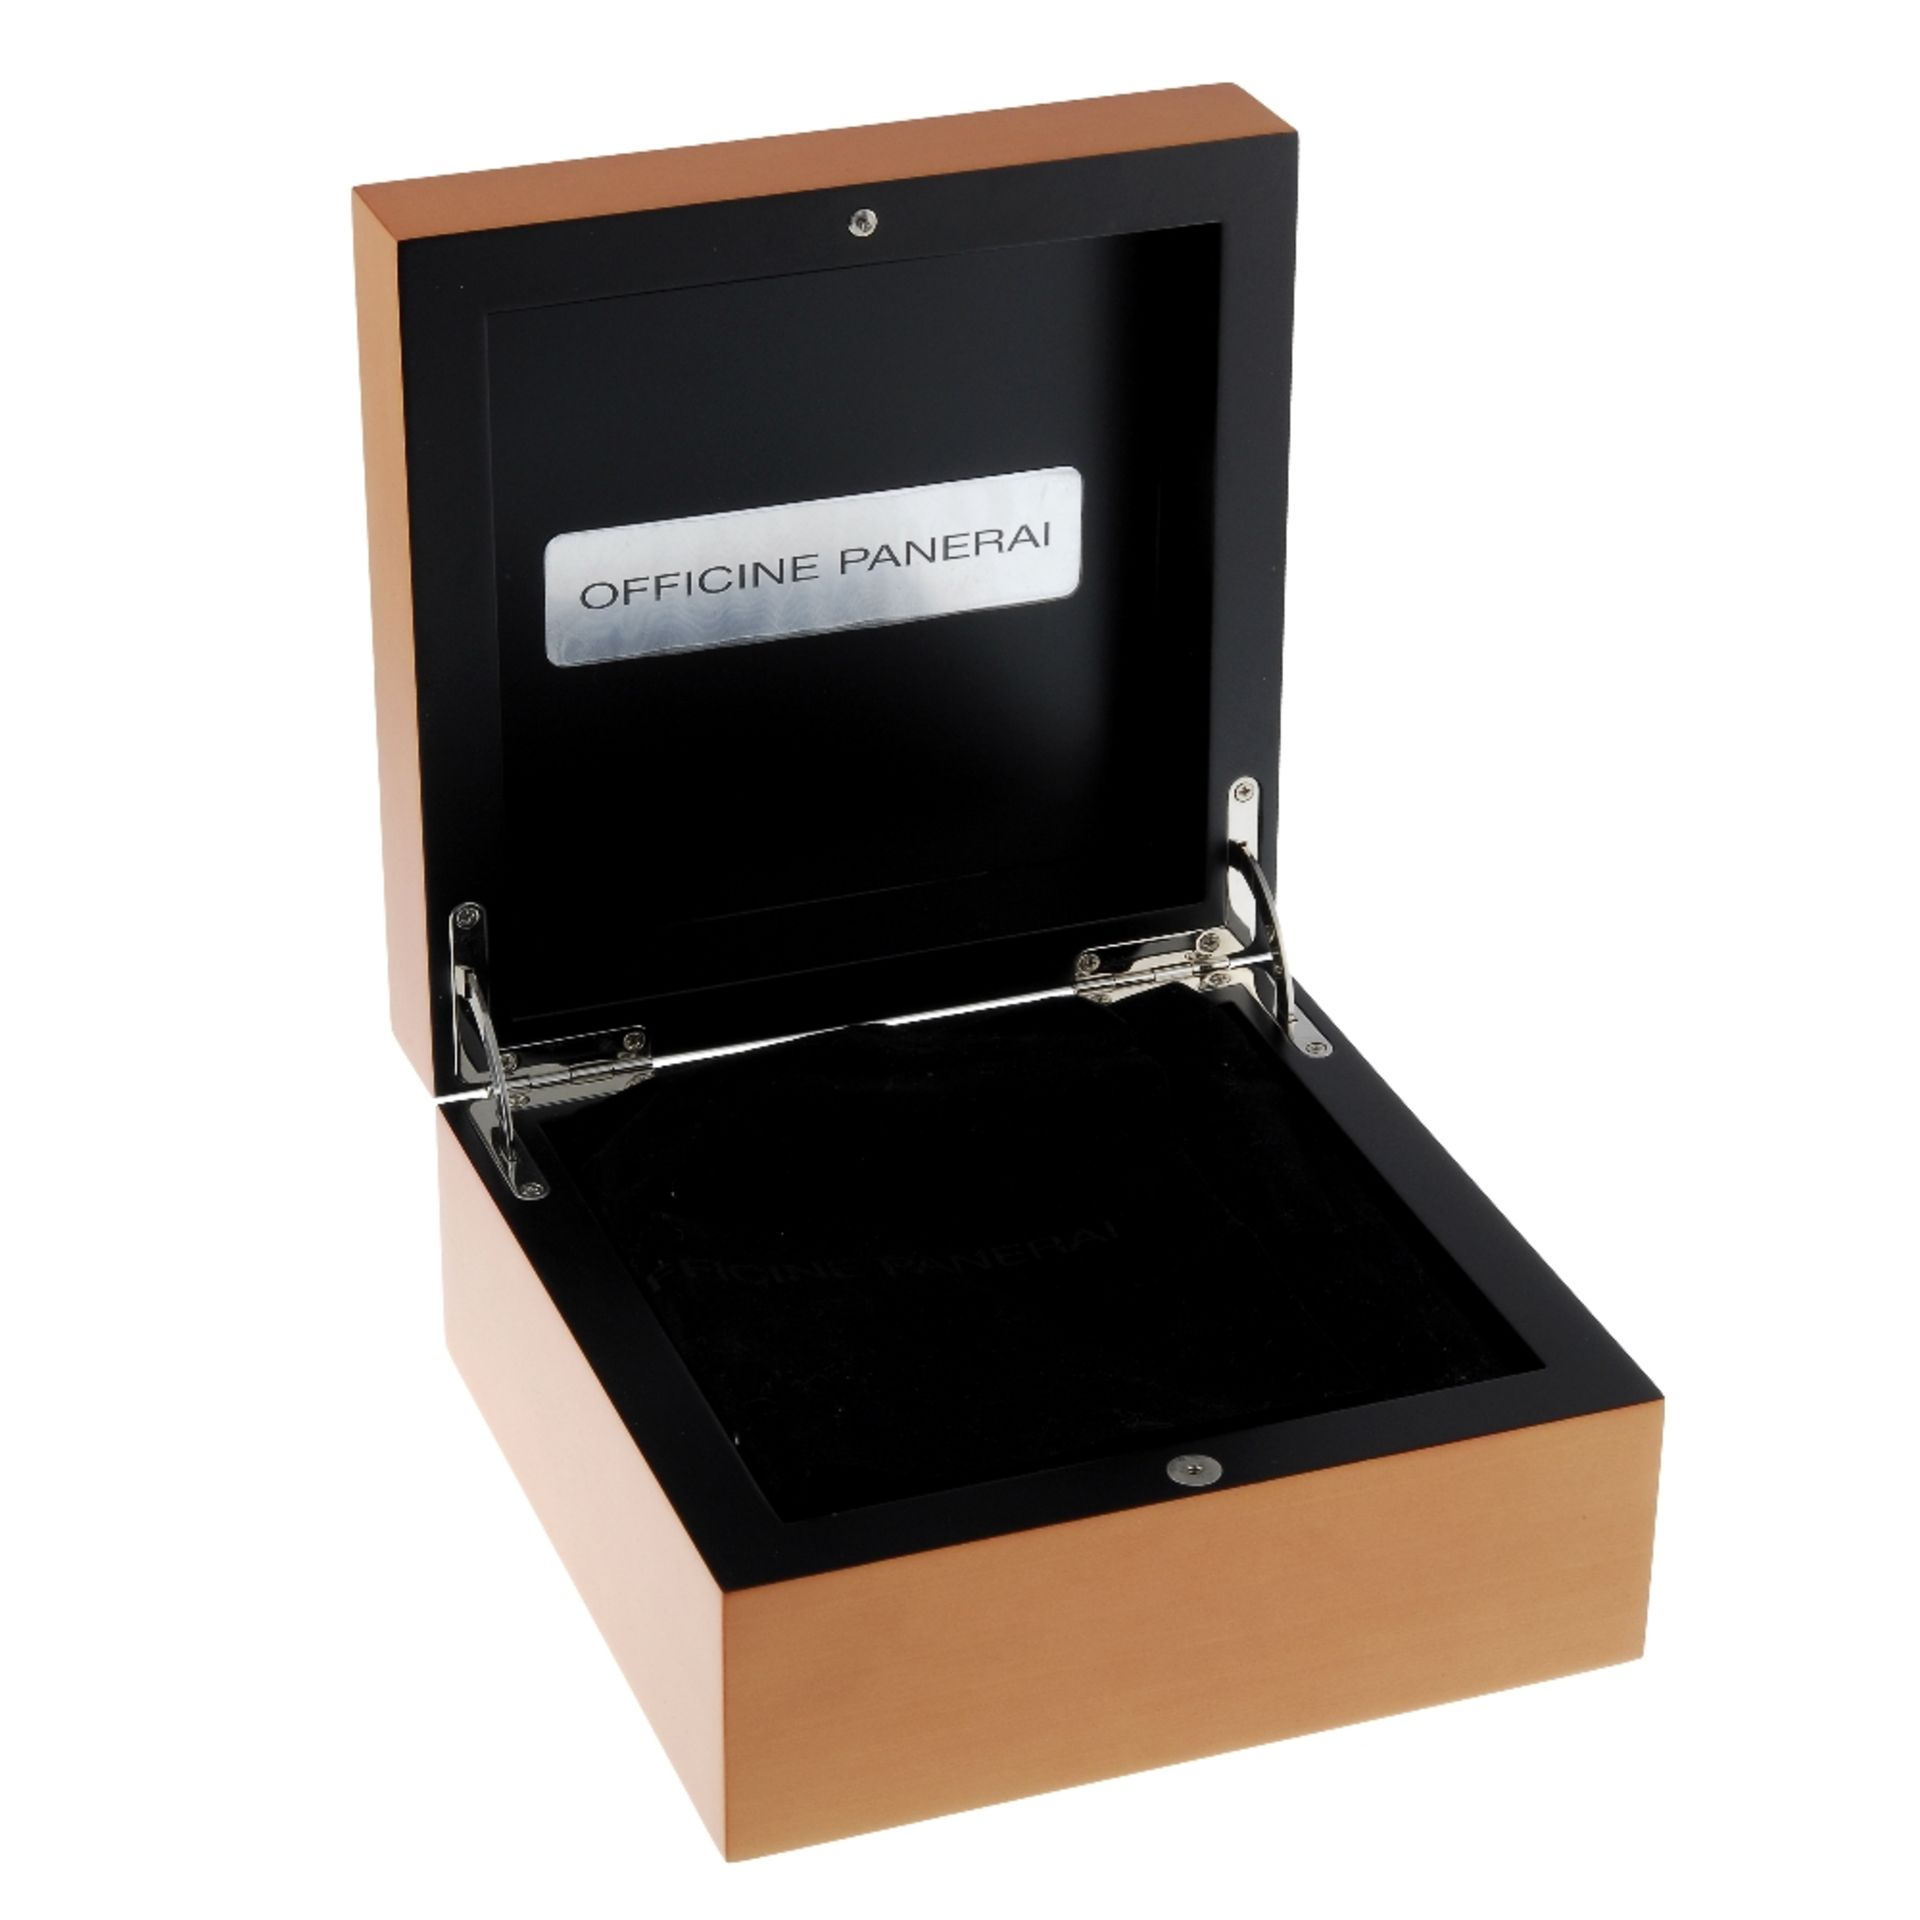 PANERAI - a pair of incomplete watch boxes. Inner boxes appear to be in a pleasant and clean